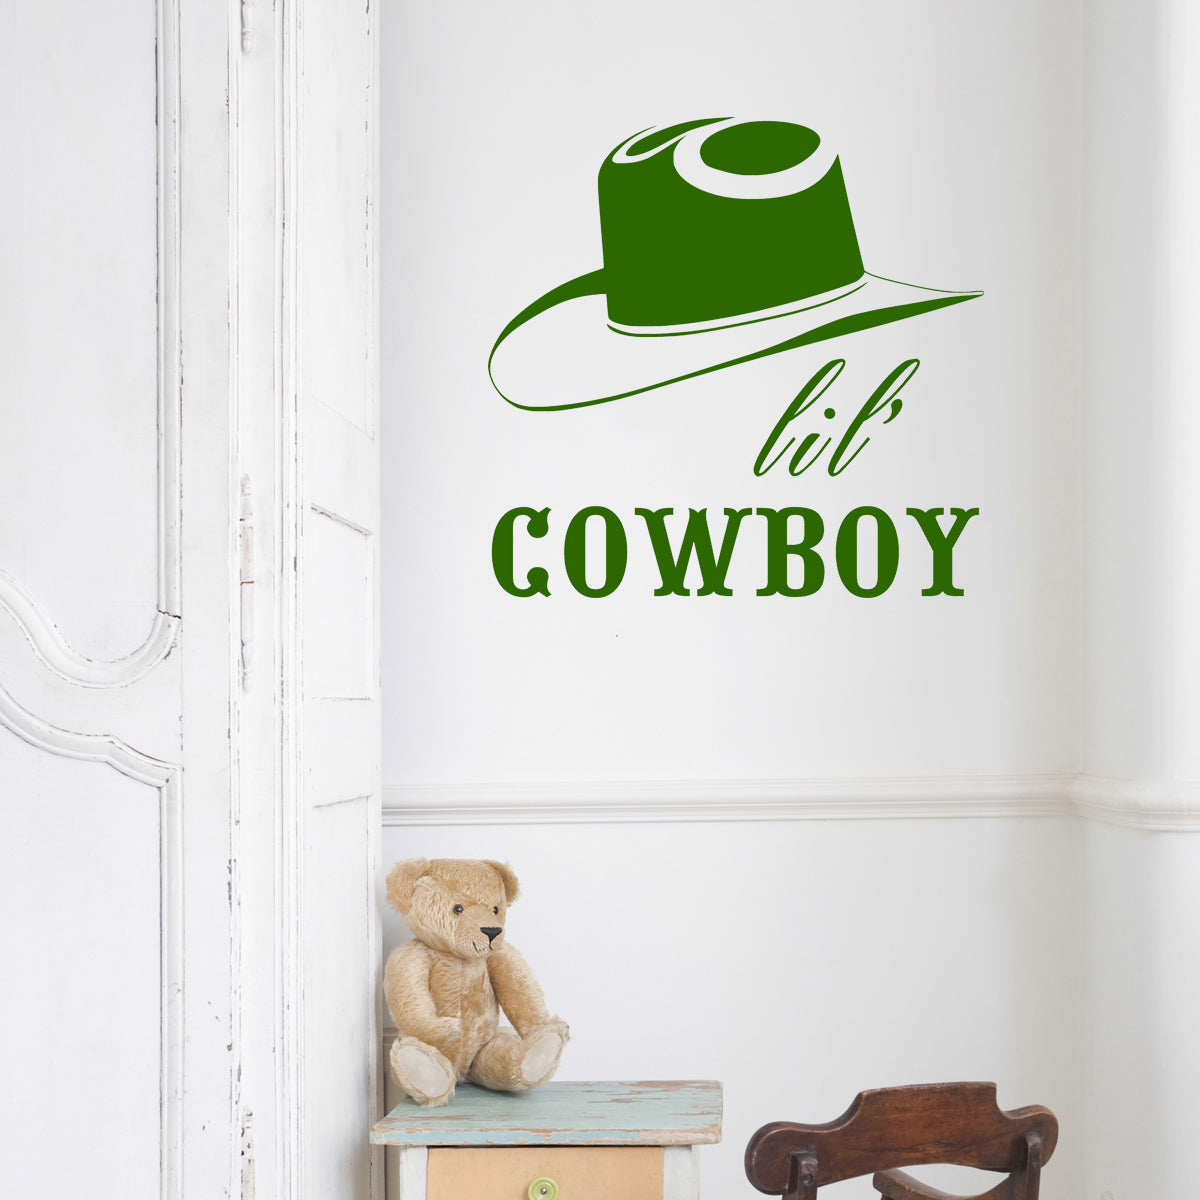 Lil cowboy | Wall quote - Adnil Creations